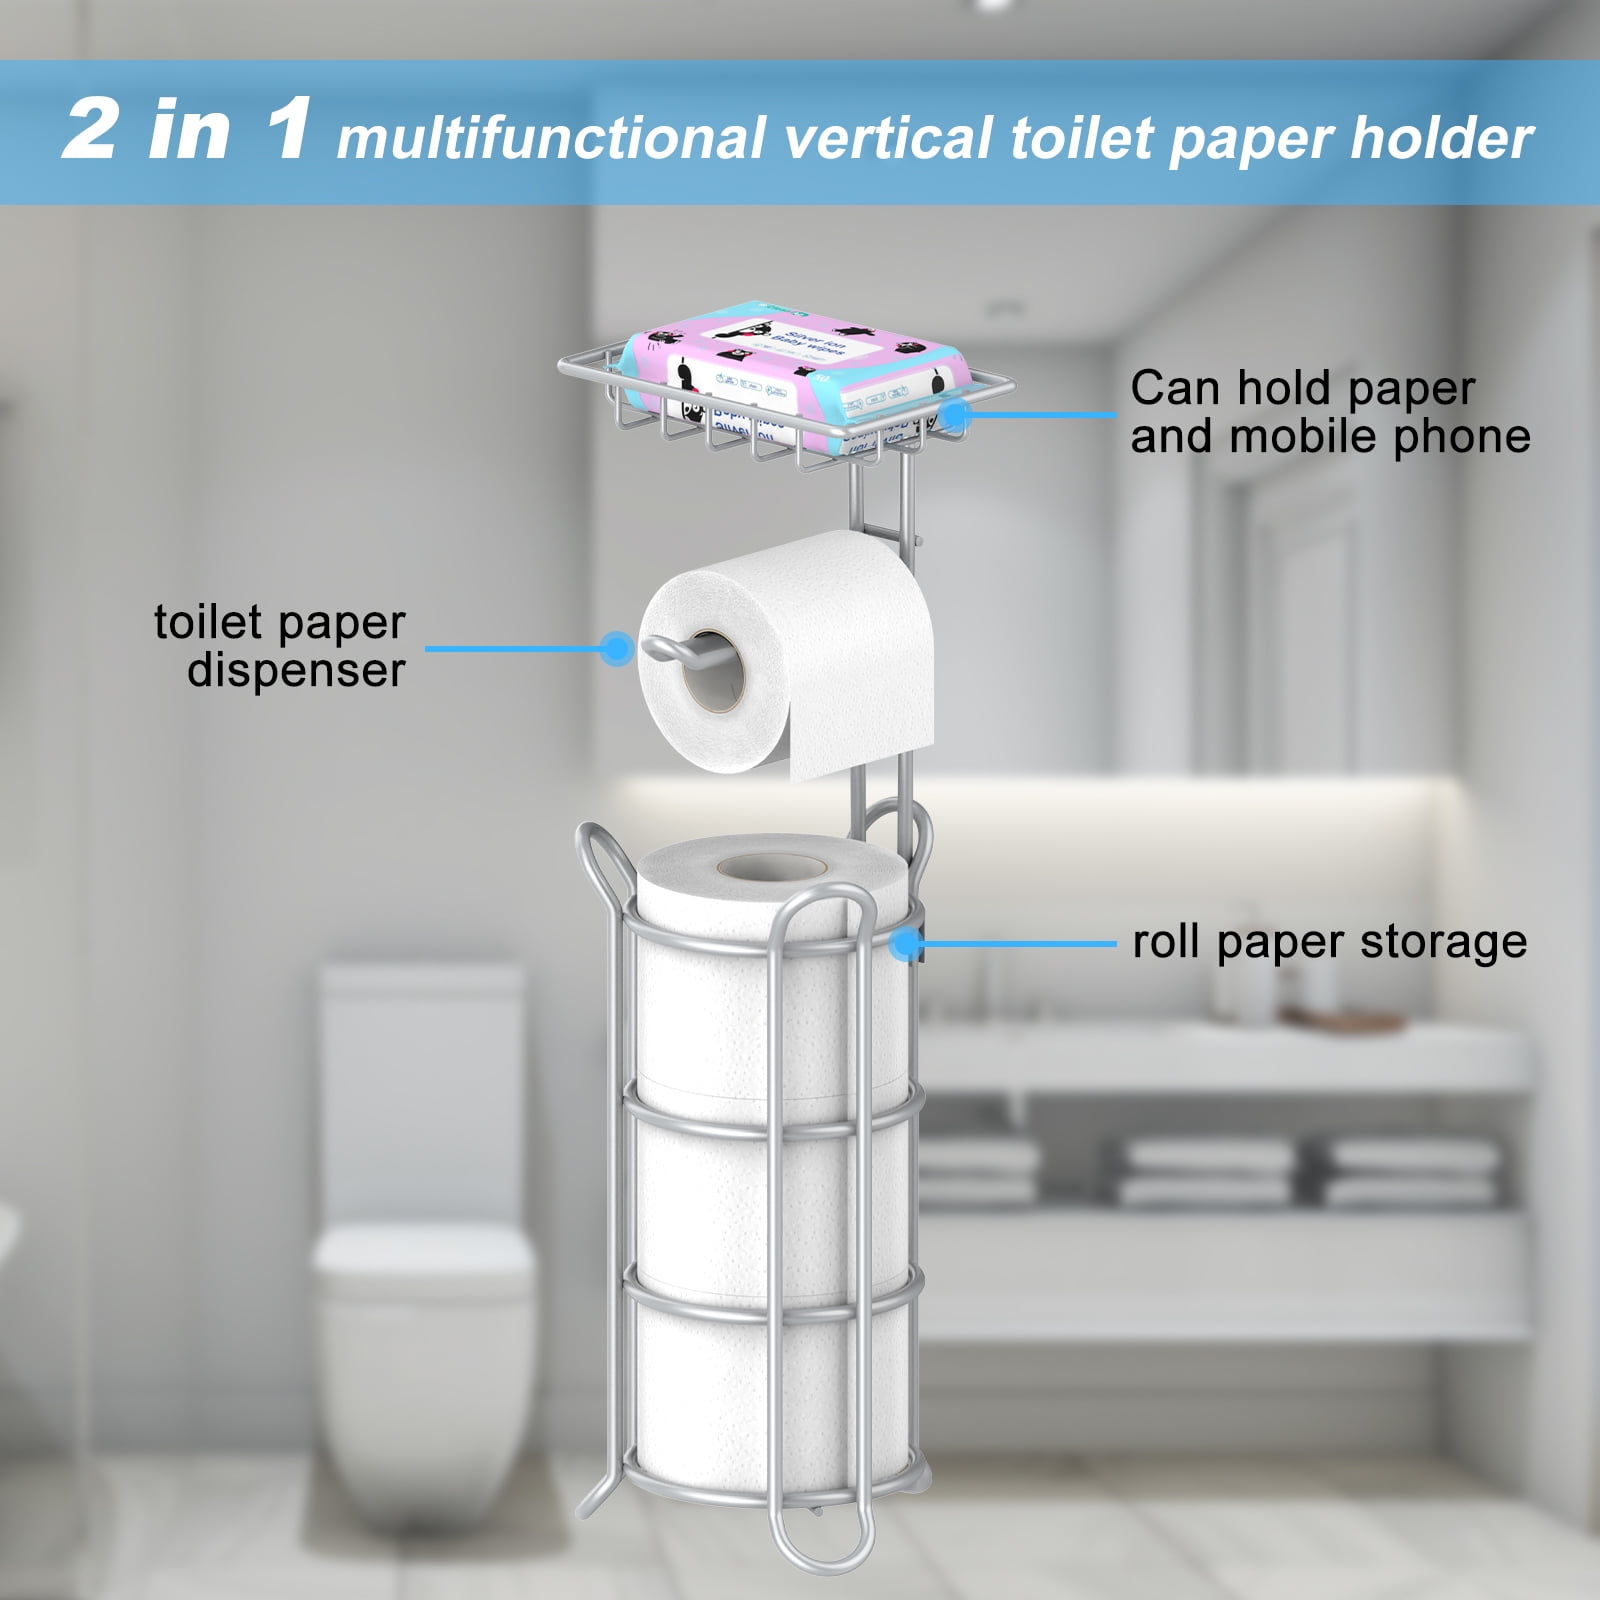 stusgo 3-in-1 Toilet Paper Holder Free Standing, Portable